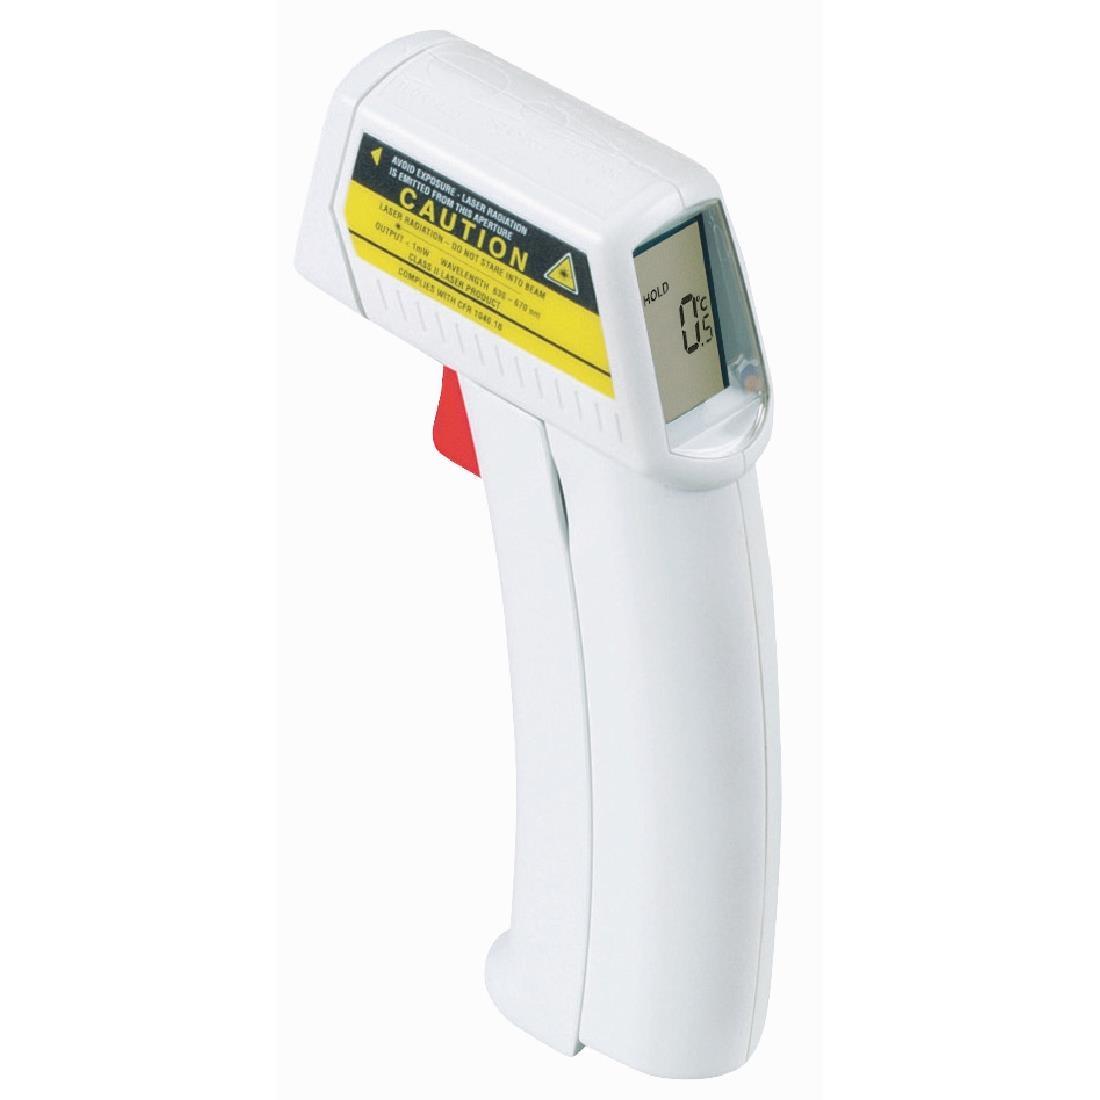 Comark Infrared Thermometer - CC099  - 1